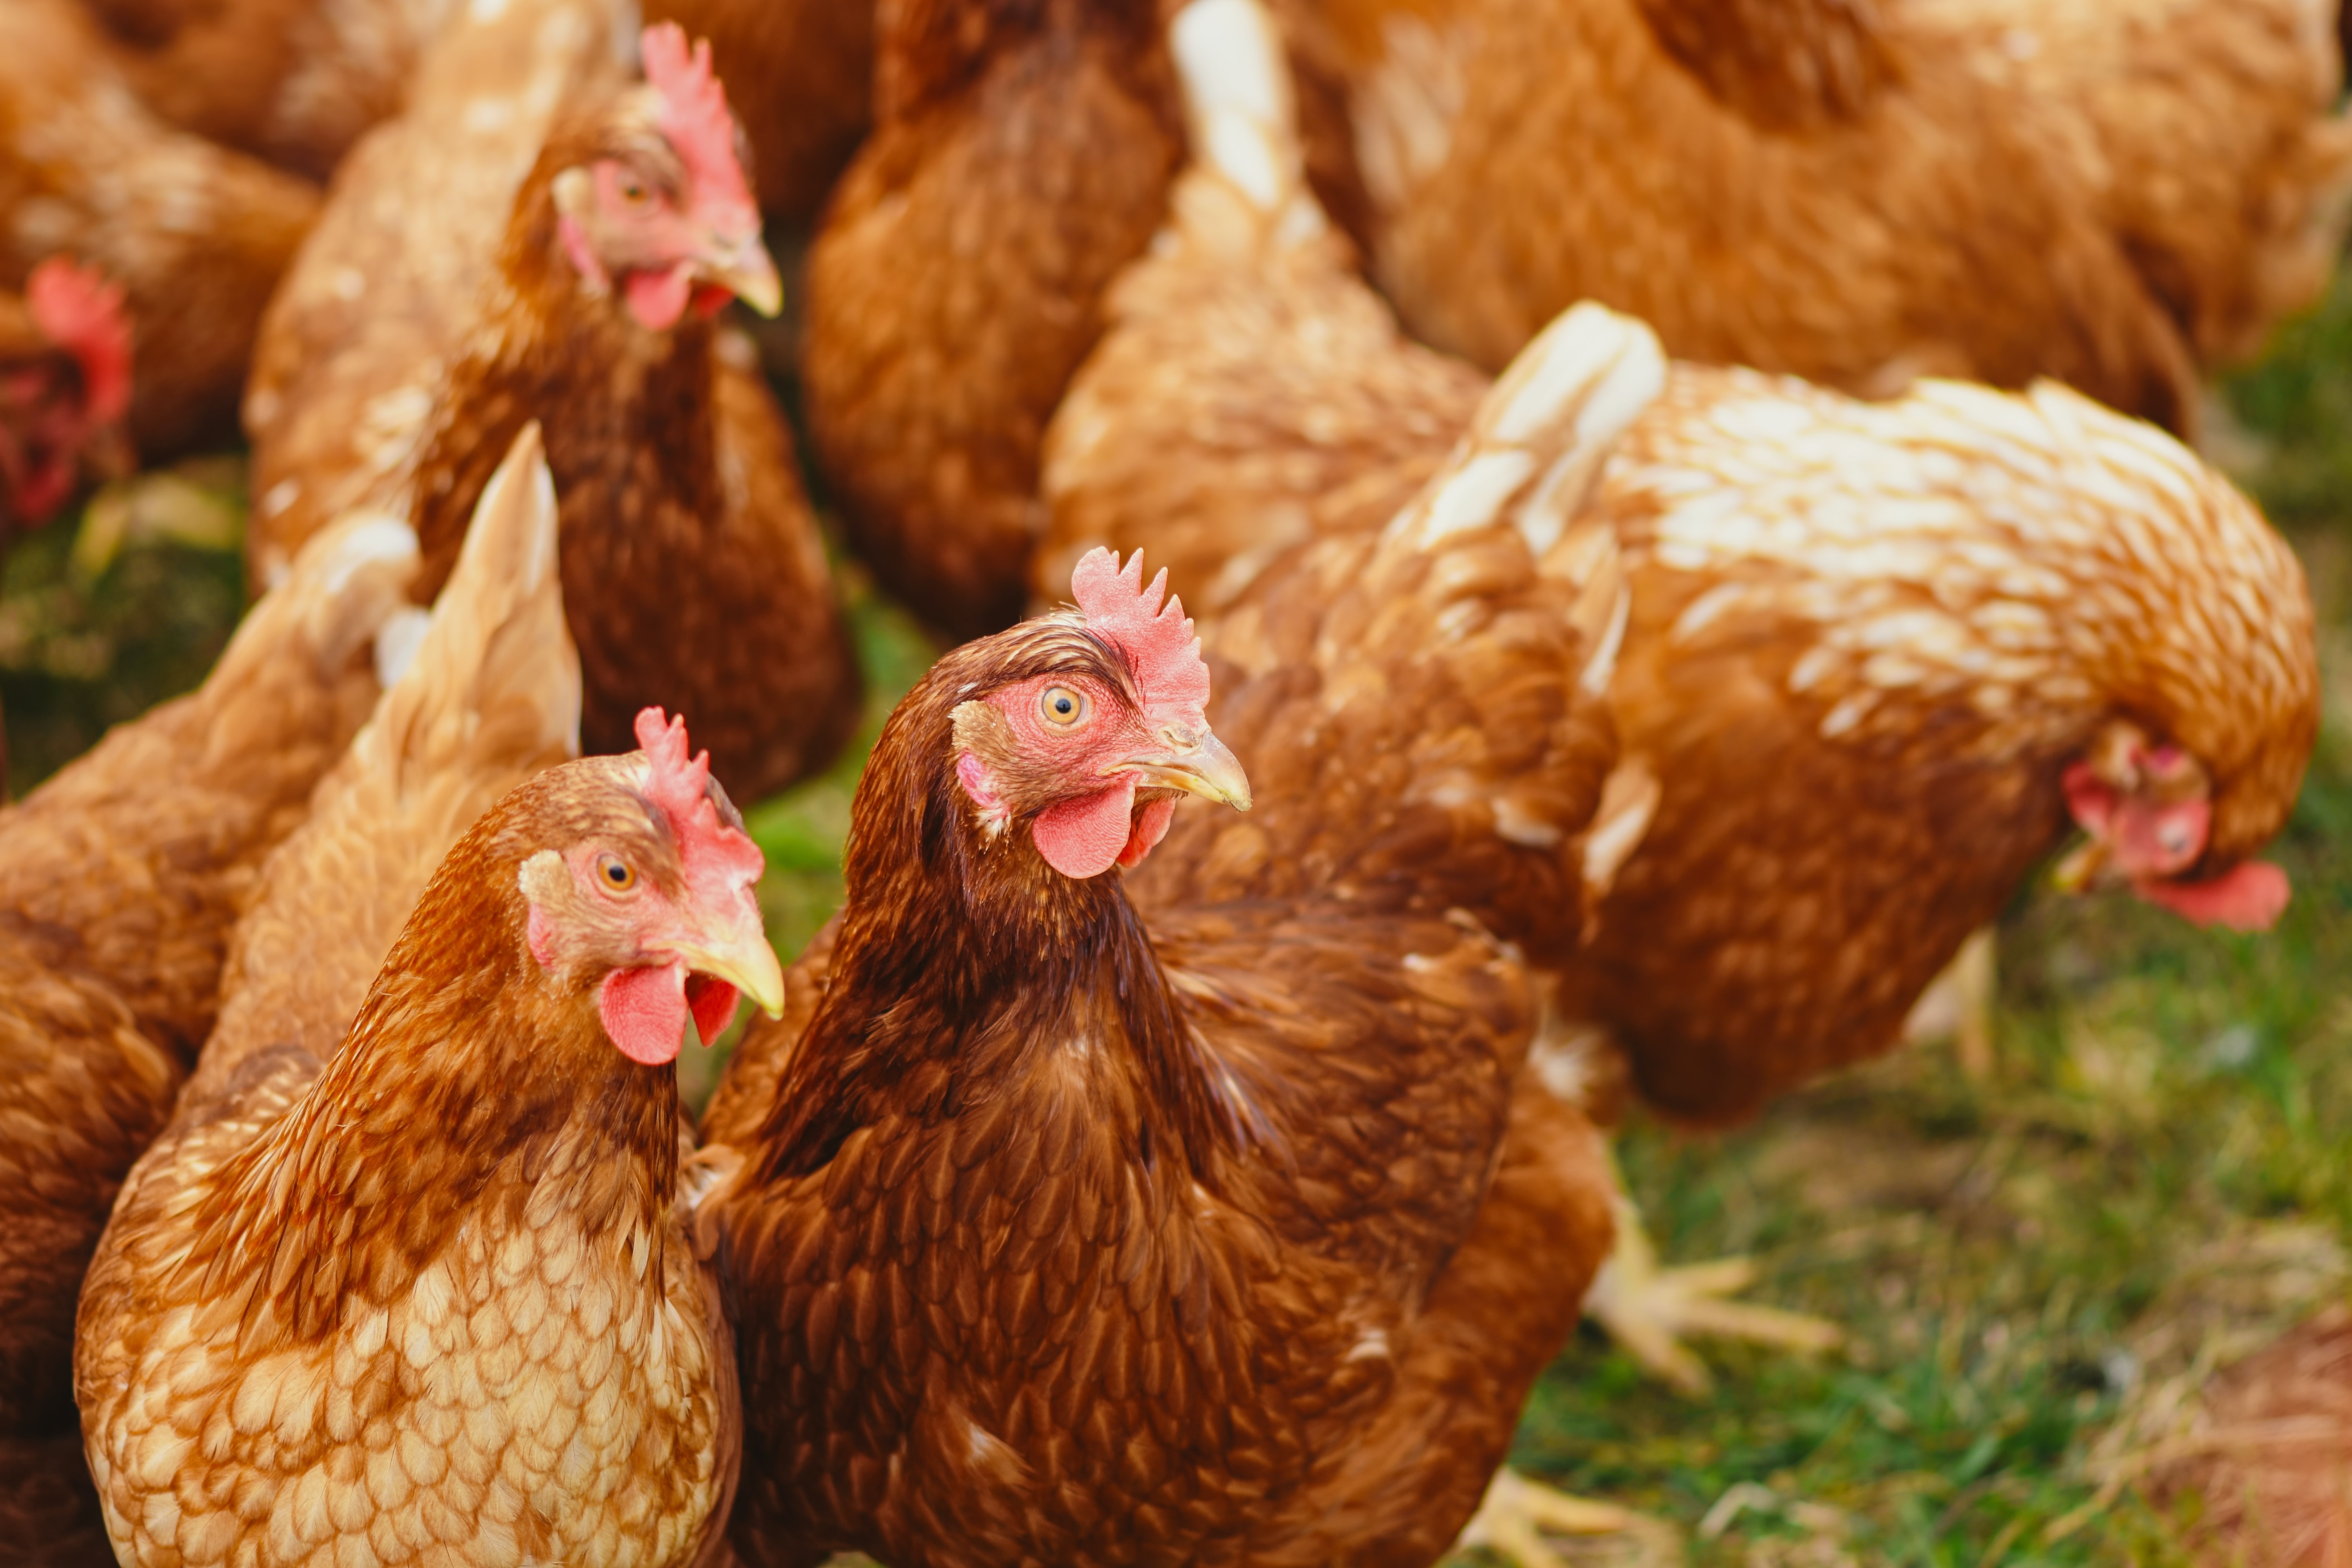 Poultry Industry Rich with R&D Tax Credit Incentives